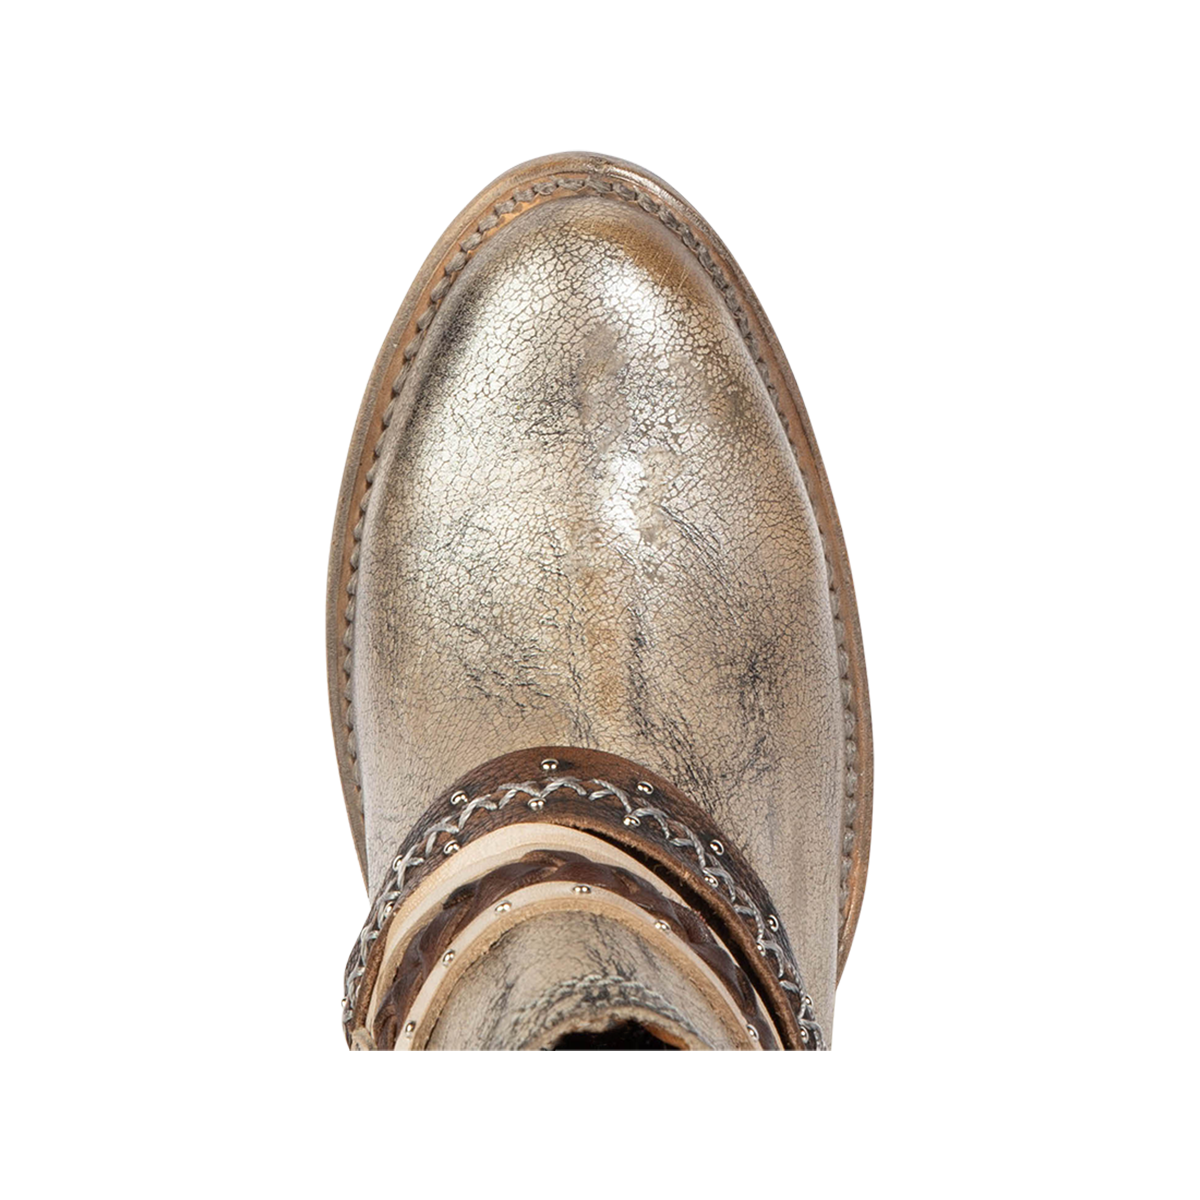 Top view showing almond toe on FREEBIRD women's Sabelle pewter bootie